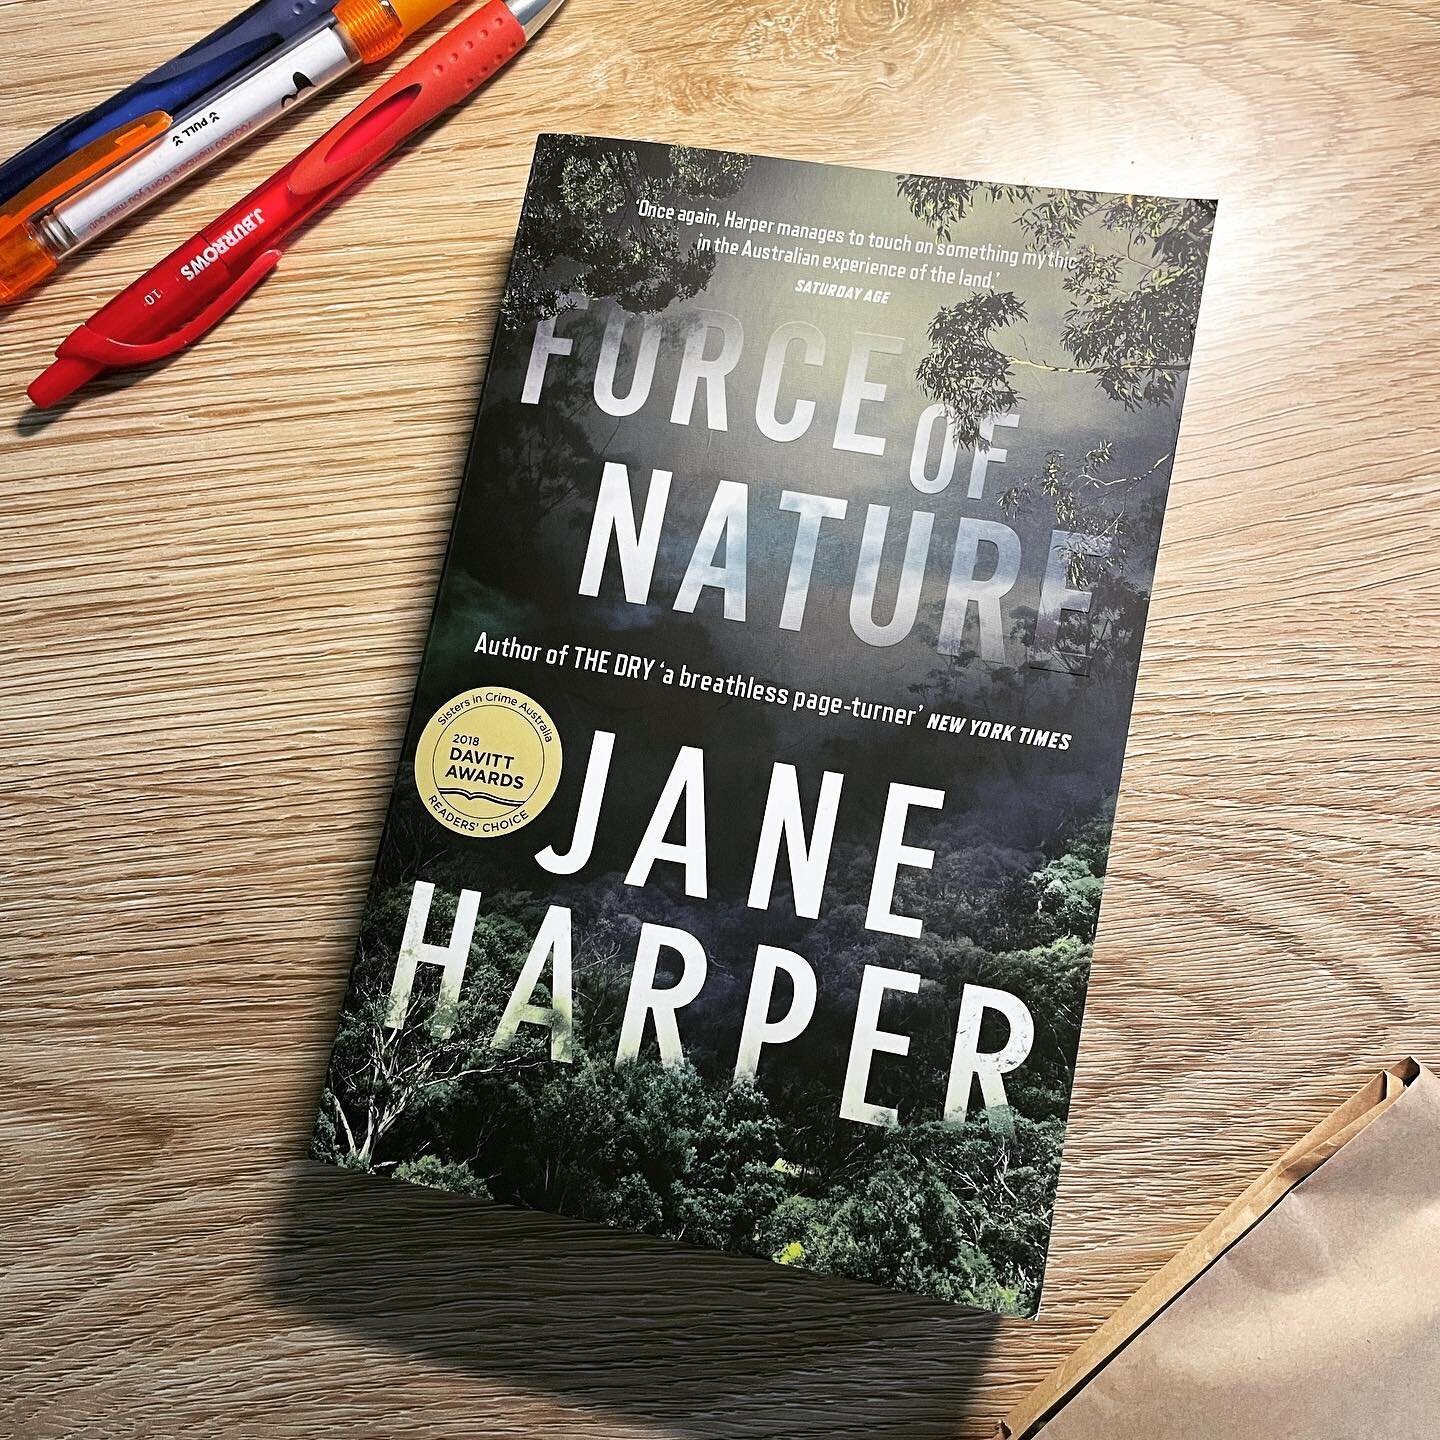 First thing is first, unlike Jane Harper&rsquo;s first novel, The Dry, Force of Nature is filled with rain and water. I&rsquo;m very disappointed that it wasn&rsquo;t called &ldquo;The Wet,&rdquo; but I digress. 

Force of Nature is much like The Dry